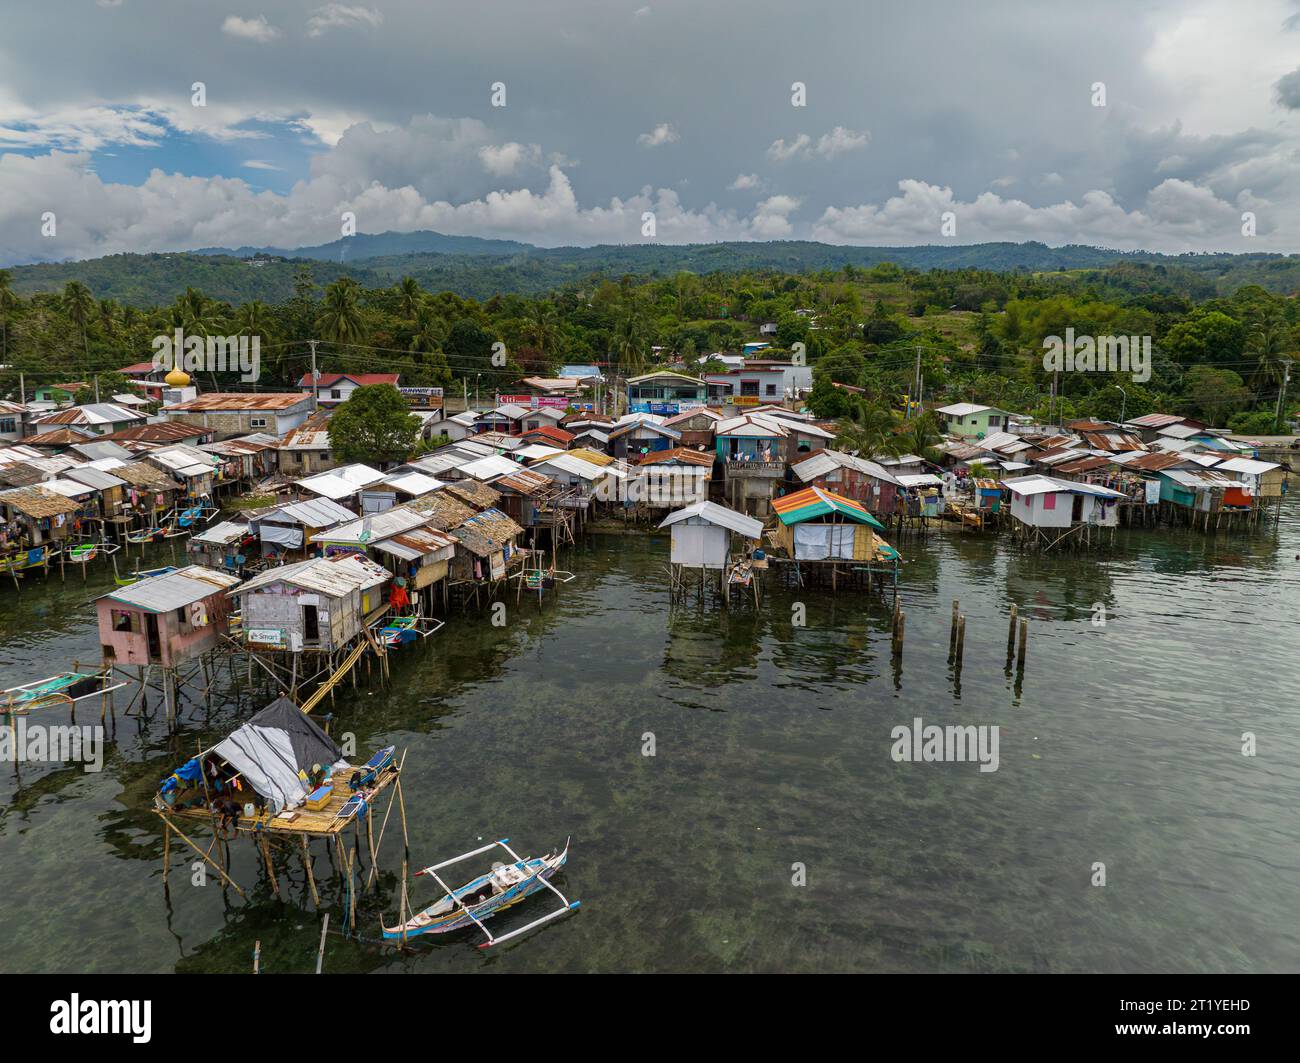 Aerial view boats beside houses located by the water in Zamboanga raised on stilts. Mindanao, Philippines. Stock Photo